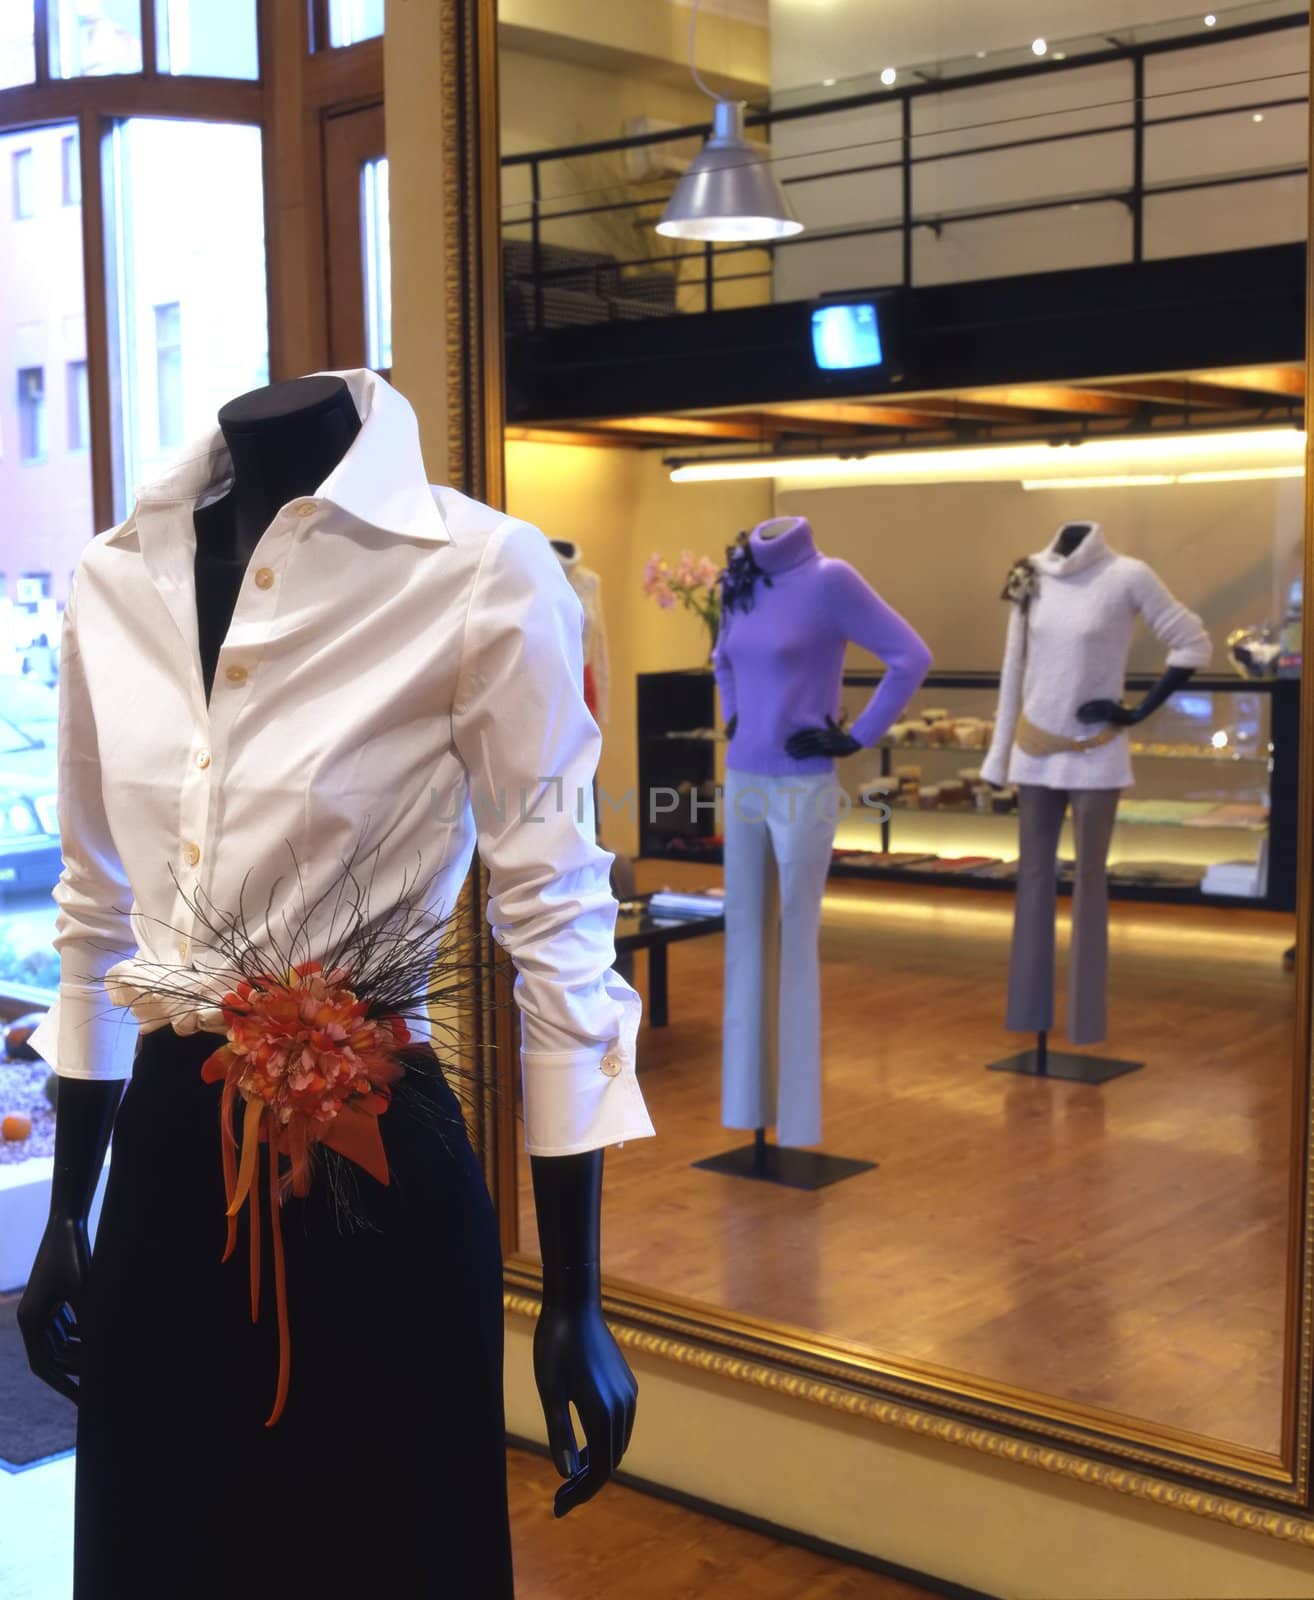 Interior of the fashionable shop with mannequin in white blouse